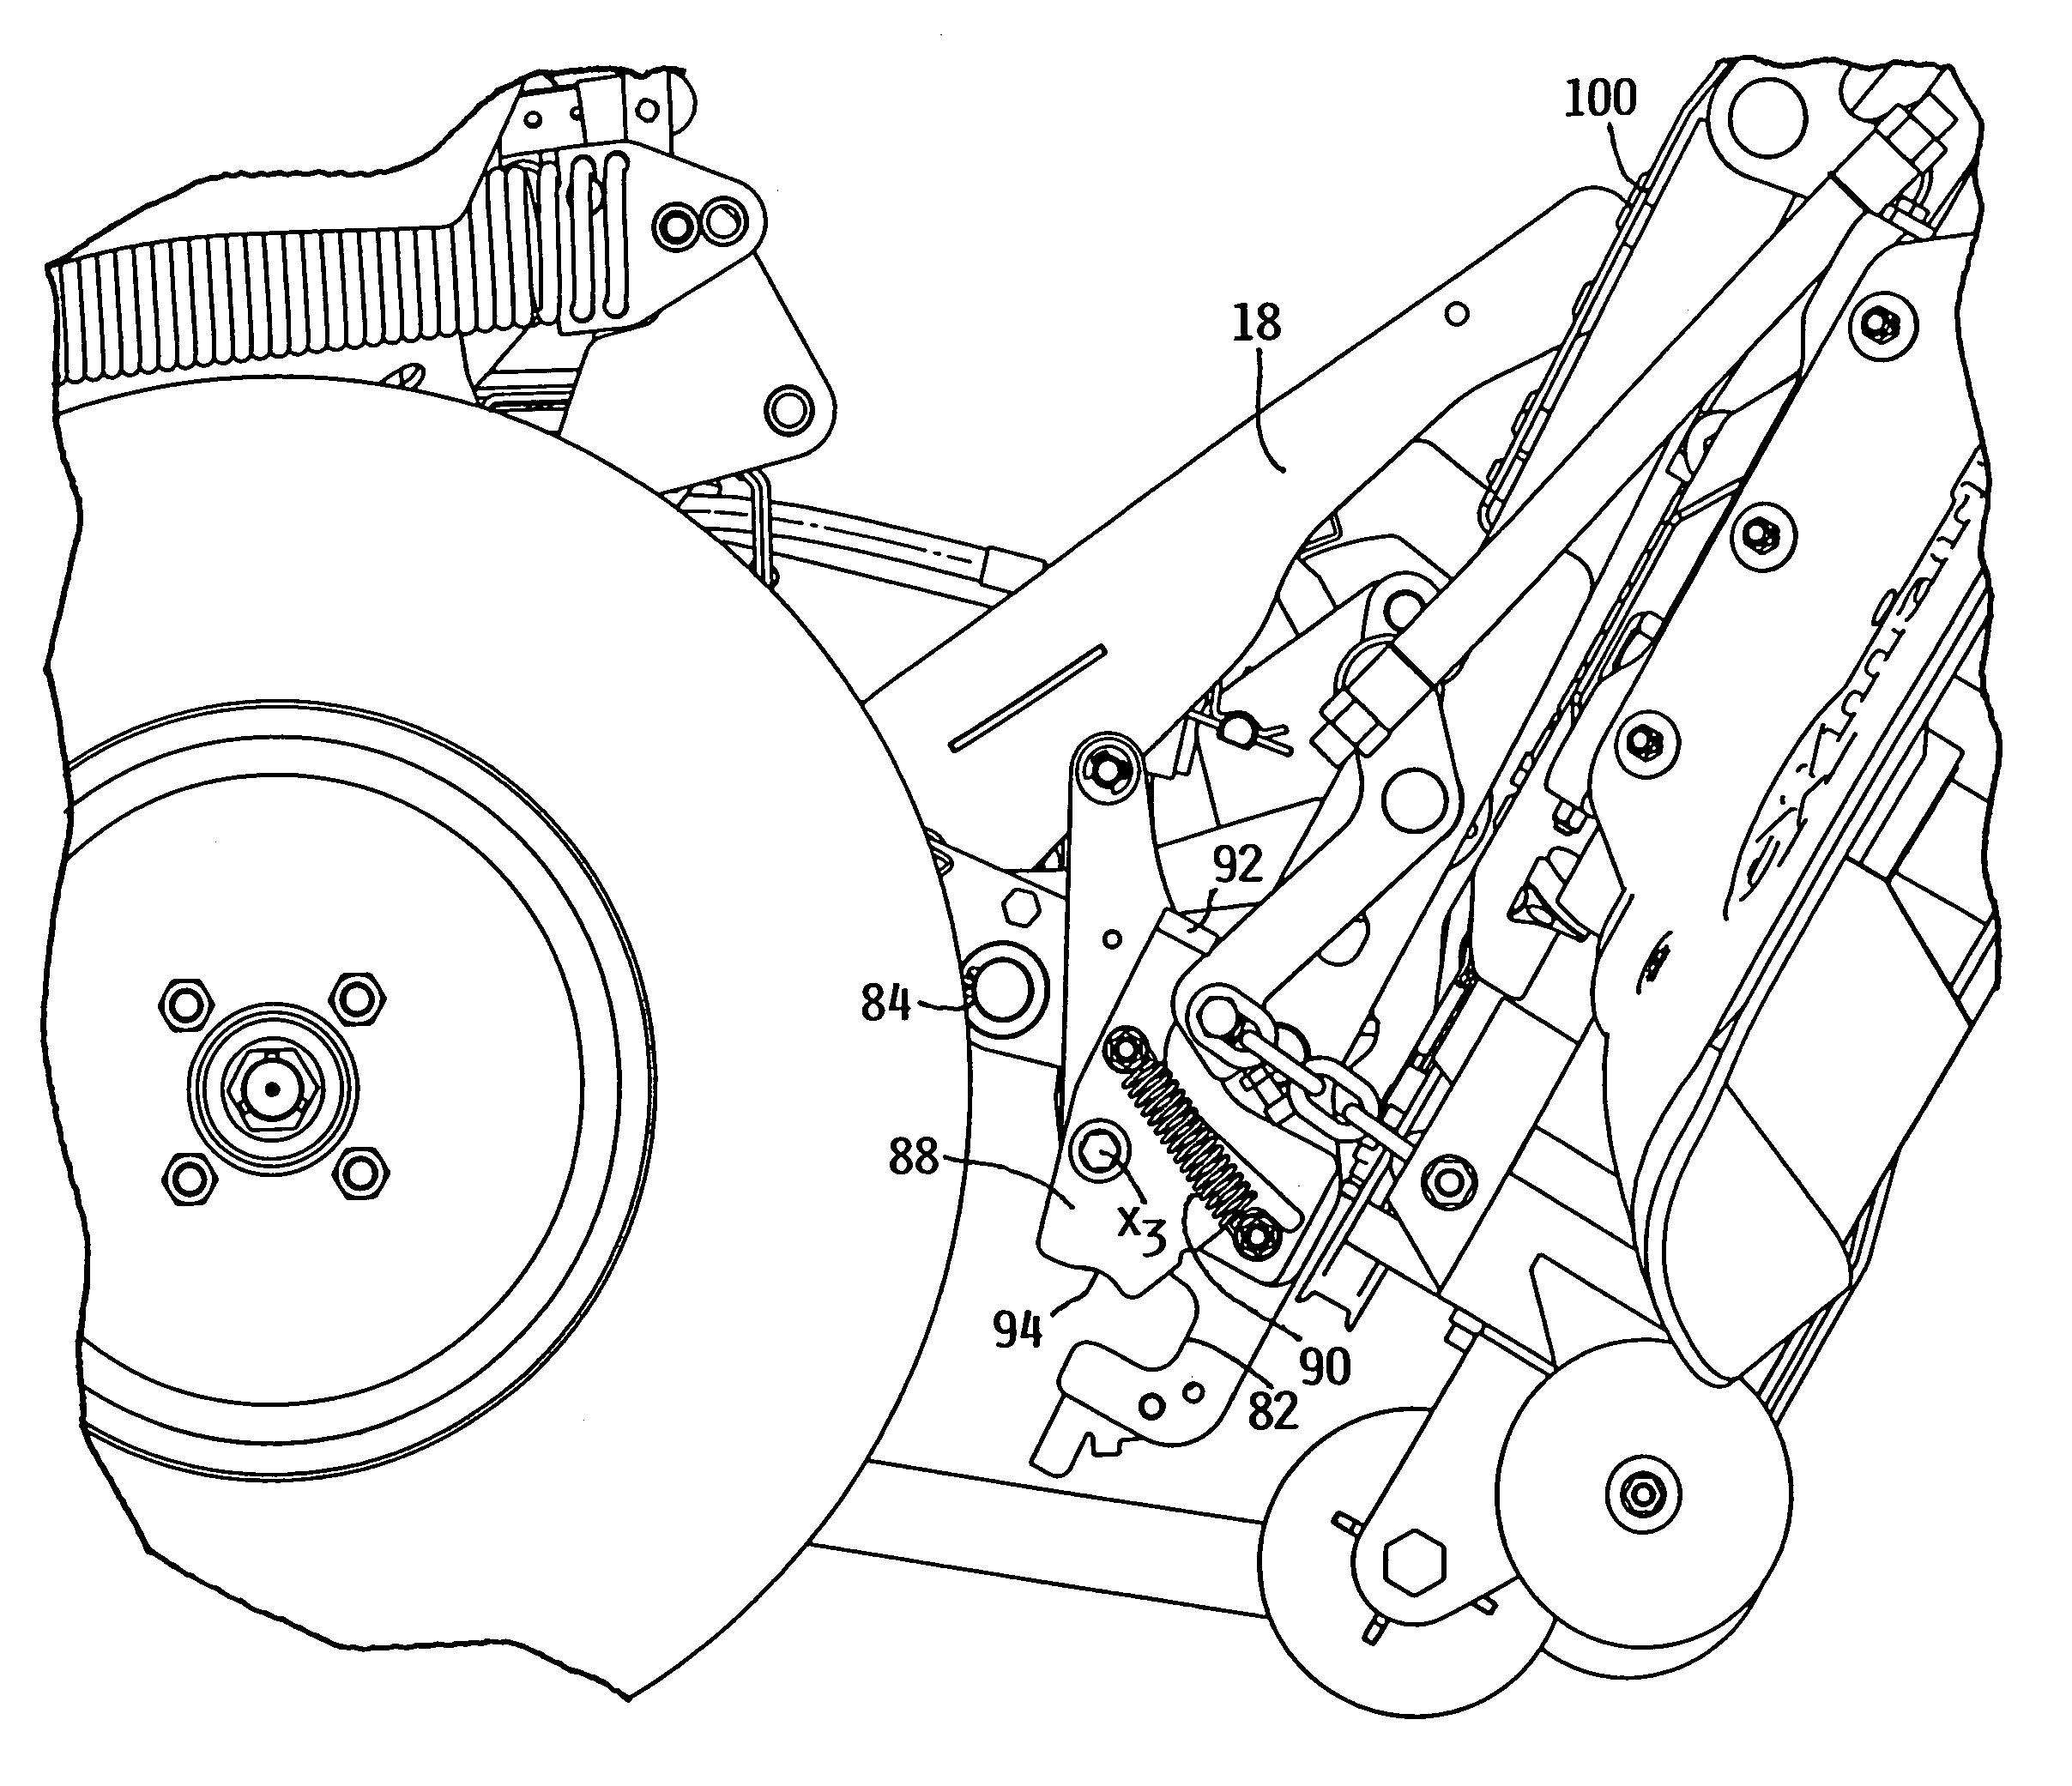 Front rotary cutting deck having folded service/storage positions